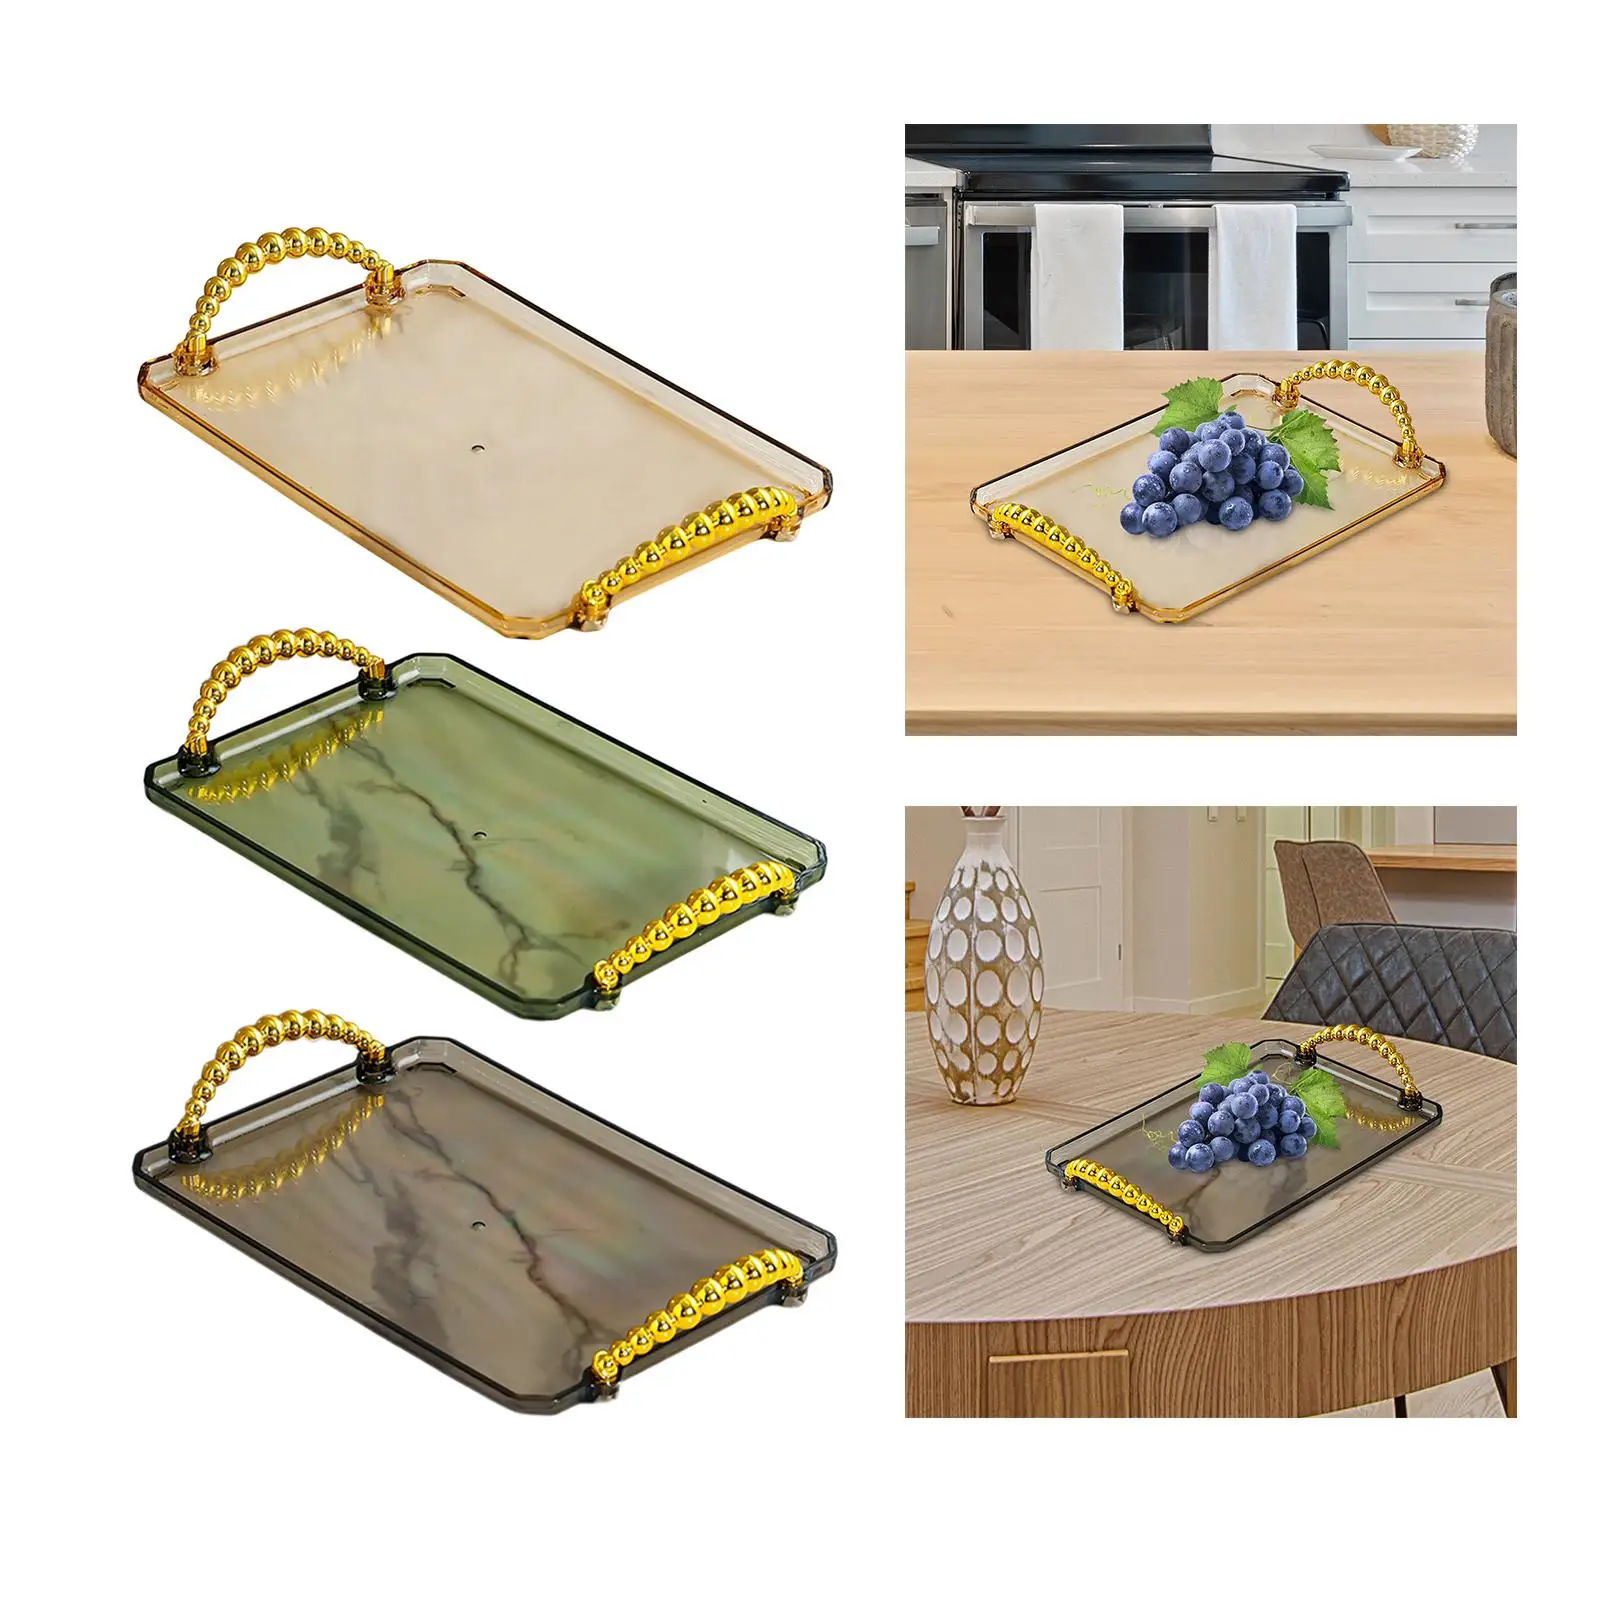 Rectangular Serving Platters Dessert Tray Cup Tea Table Trays Bathroom Vanity Tray for Dressing Room Toilet Bathroom Party Home